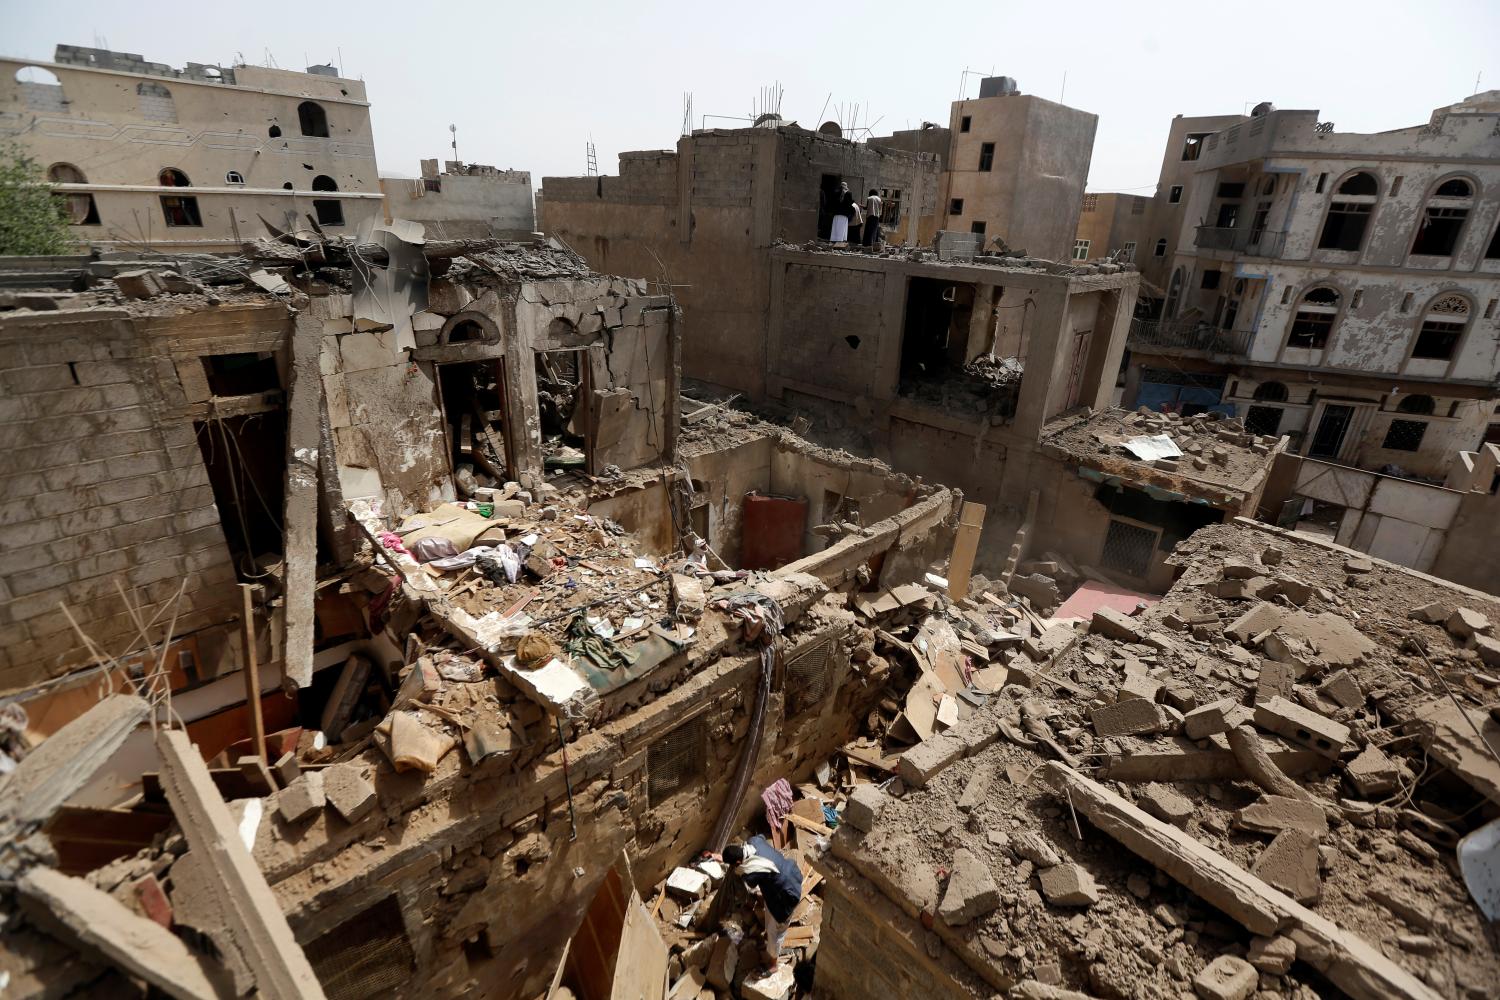 A man searches in the rubble of a house destroyed by an air strike in Amran, Yemen June 25, 2018. REUTERS/Khaled Abdullah - RC1C1F459690